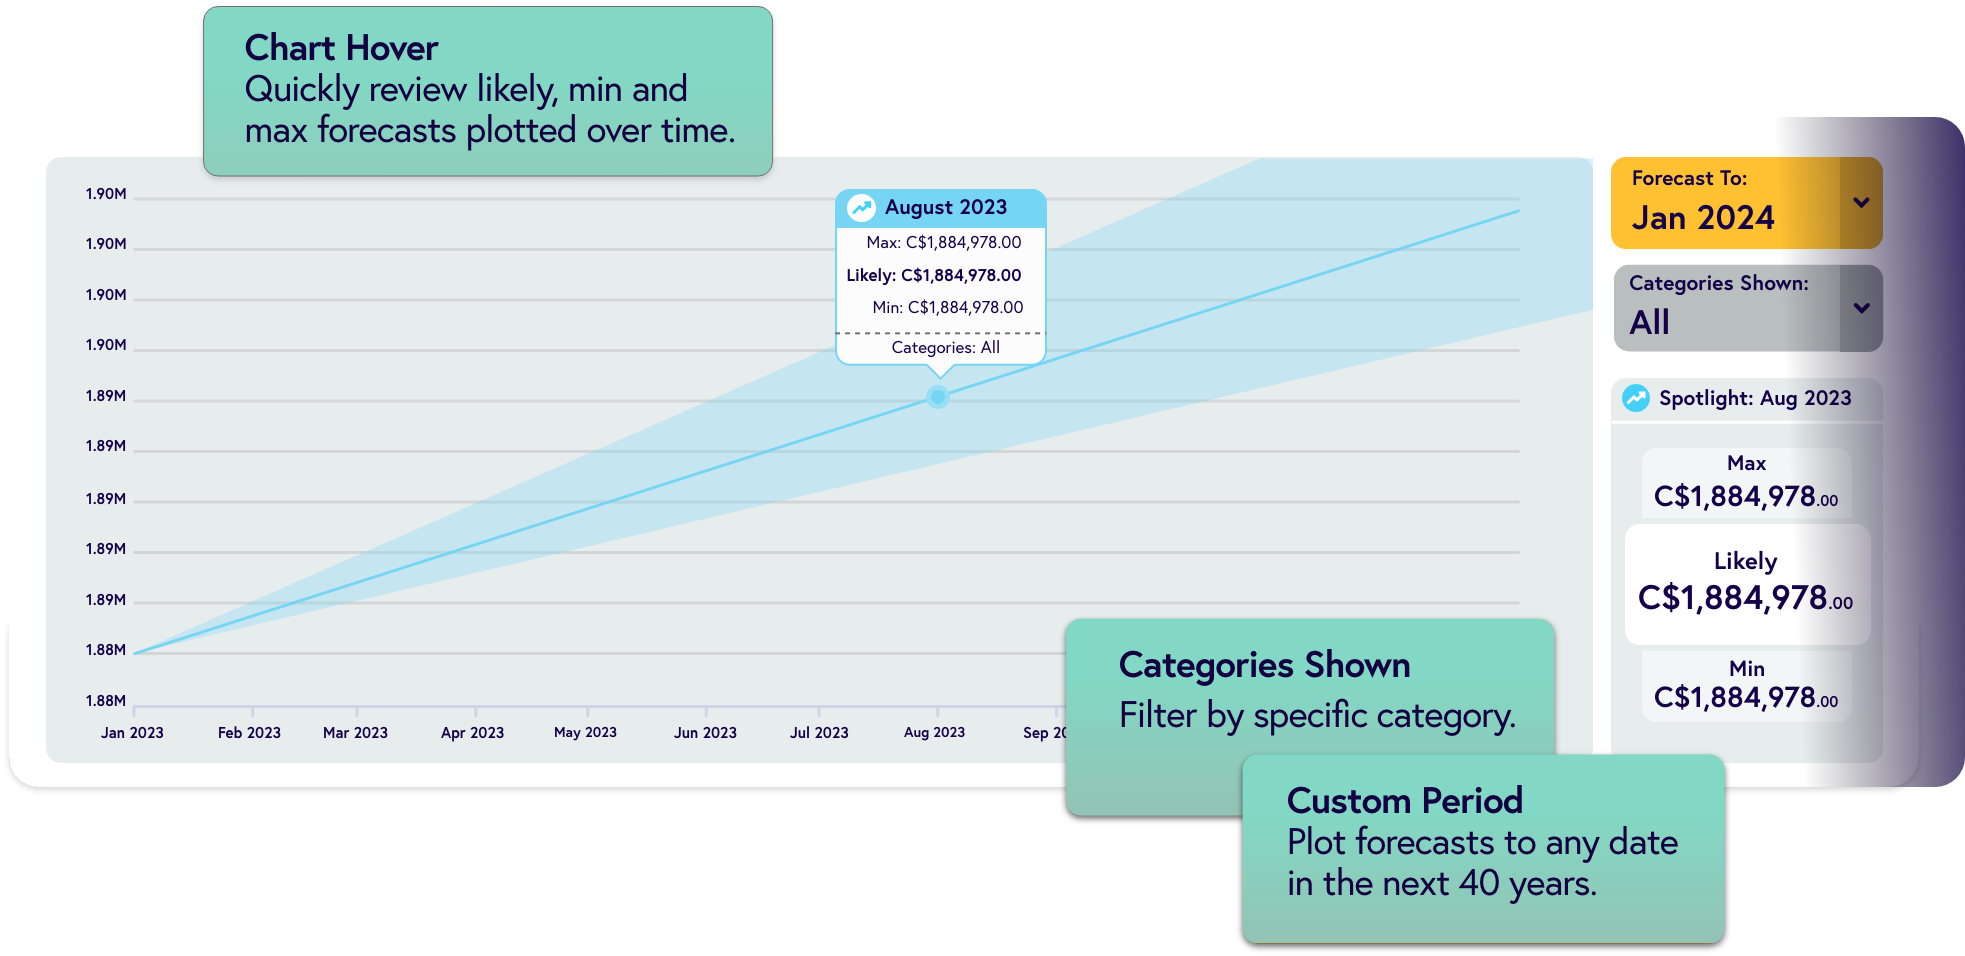 Quickly review likely, min and max forecasts plotted over time and filter by specific categories